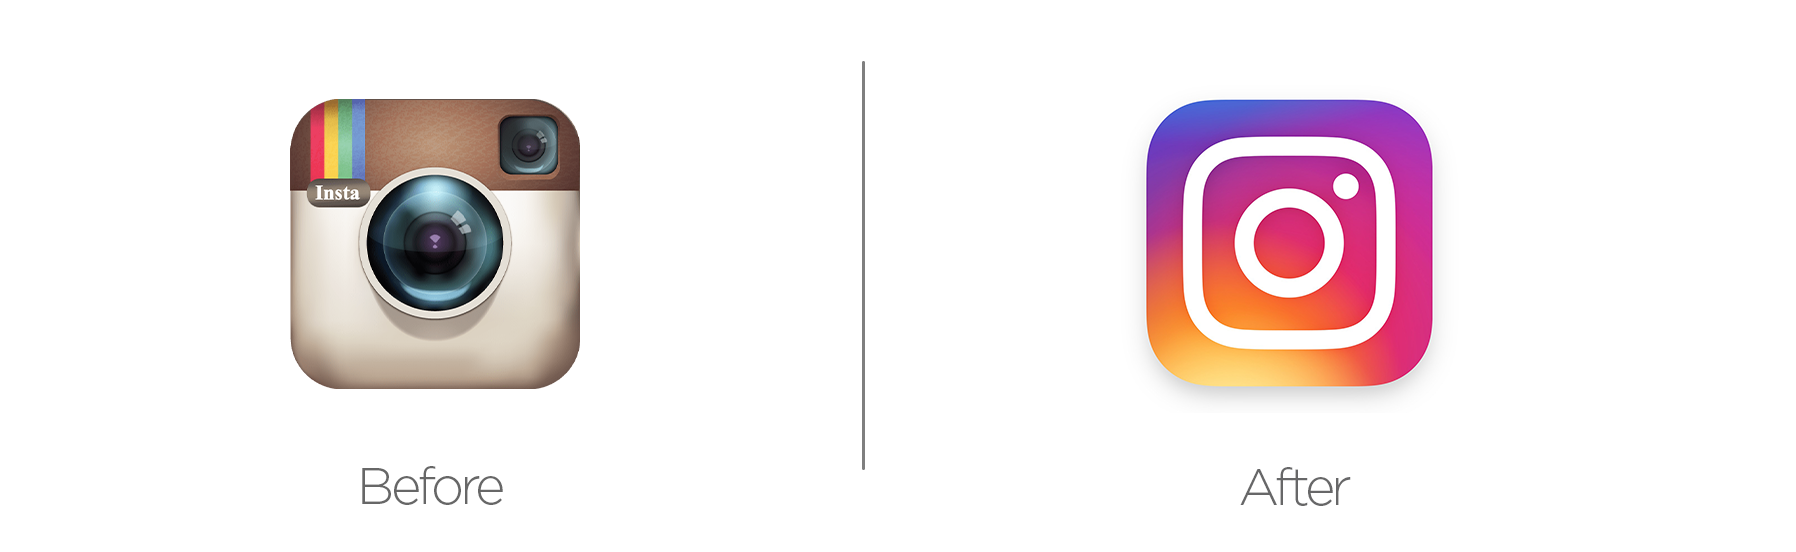 Instagram rebrand before and after